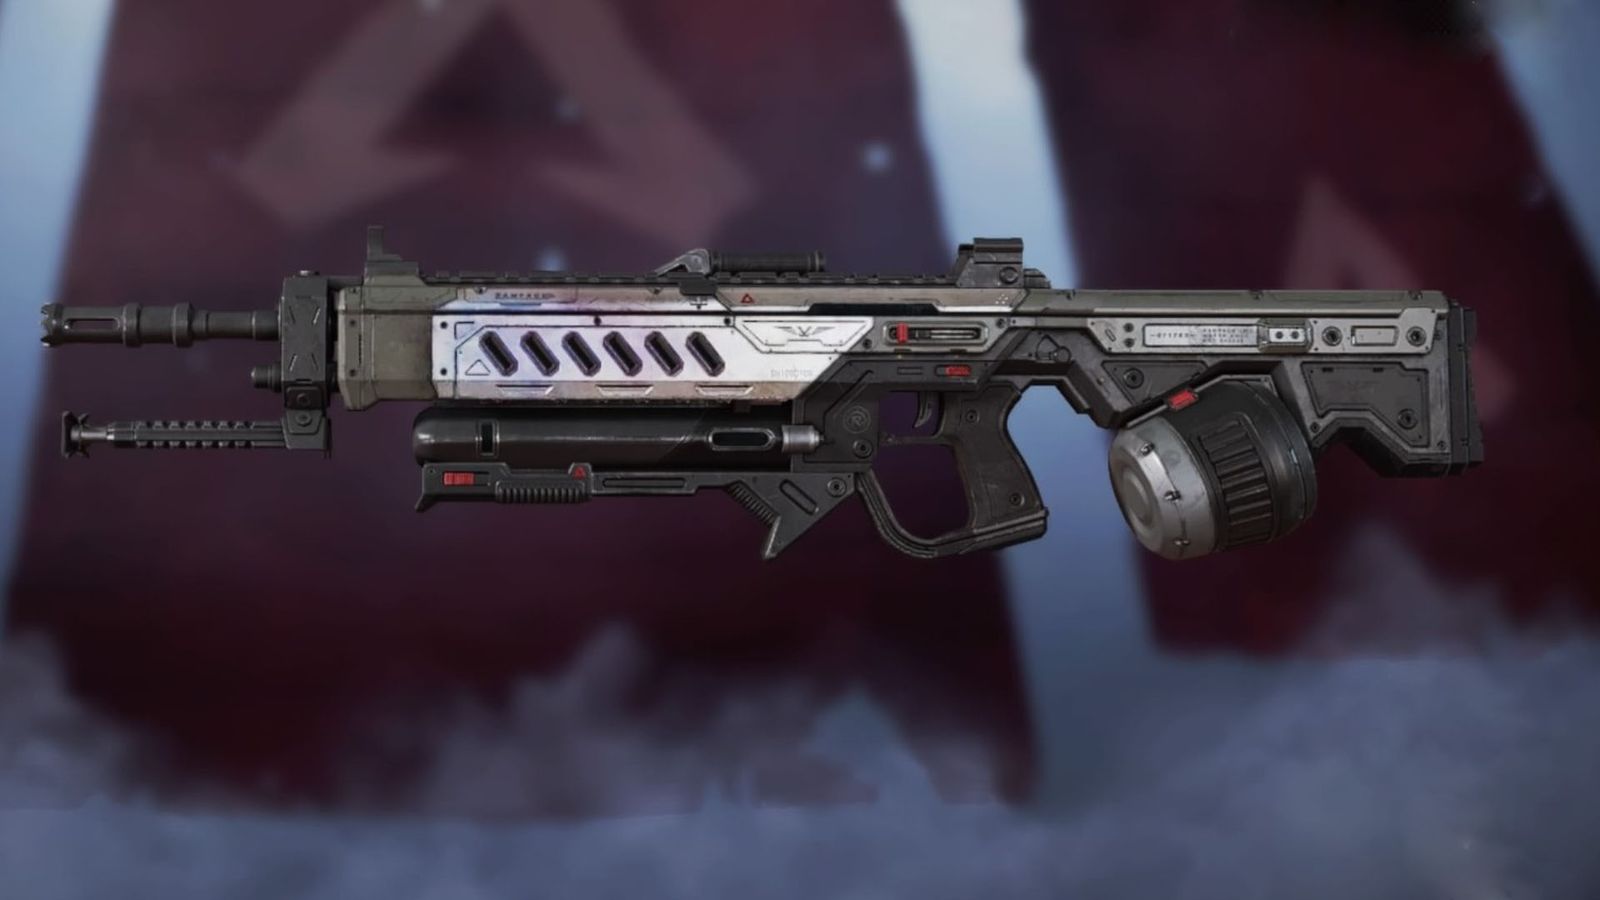 Apex Legends. Rampage LMG weapon in the Factory Issue Skin